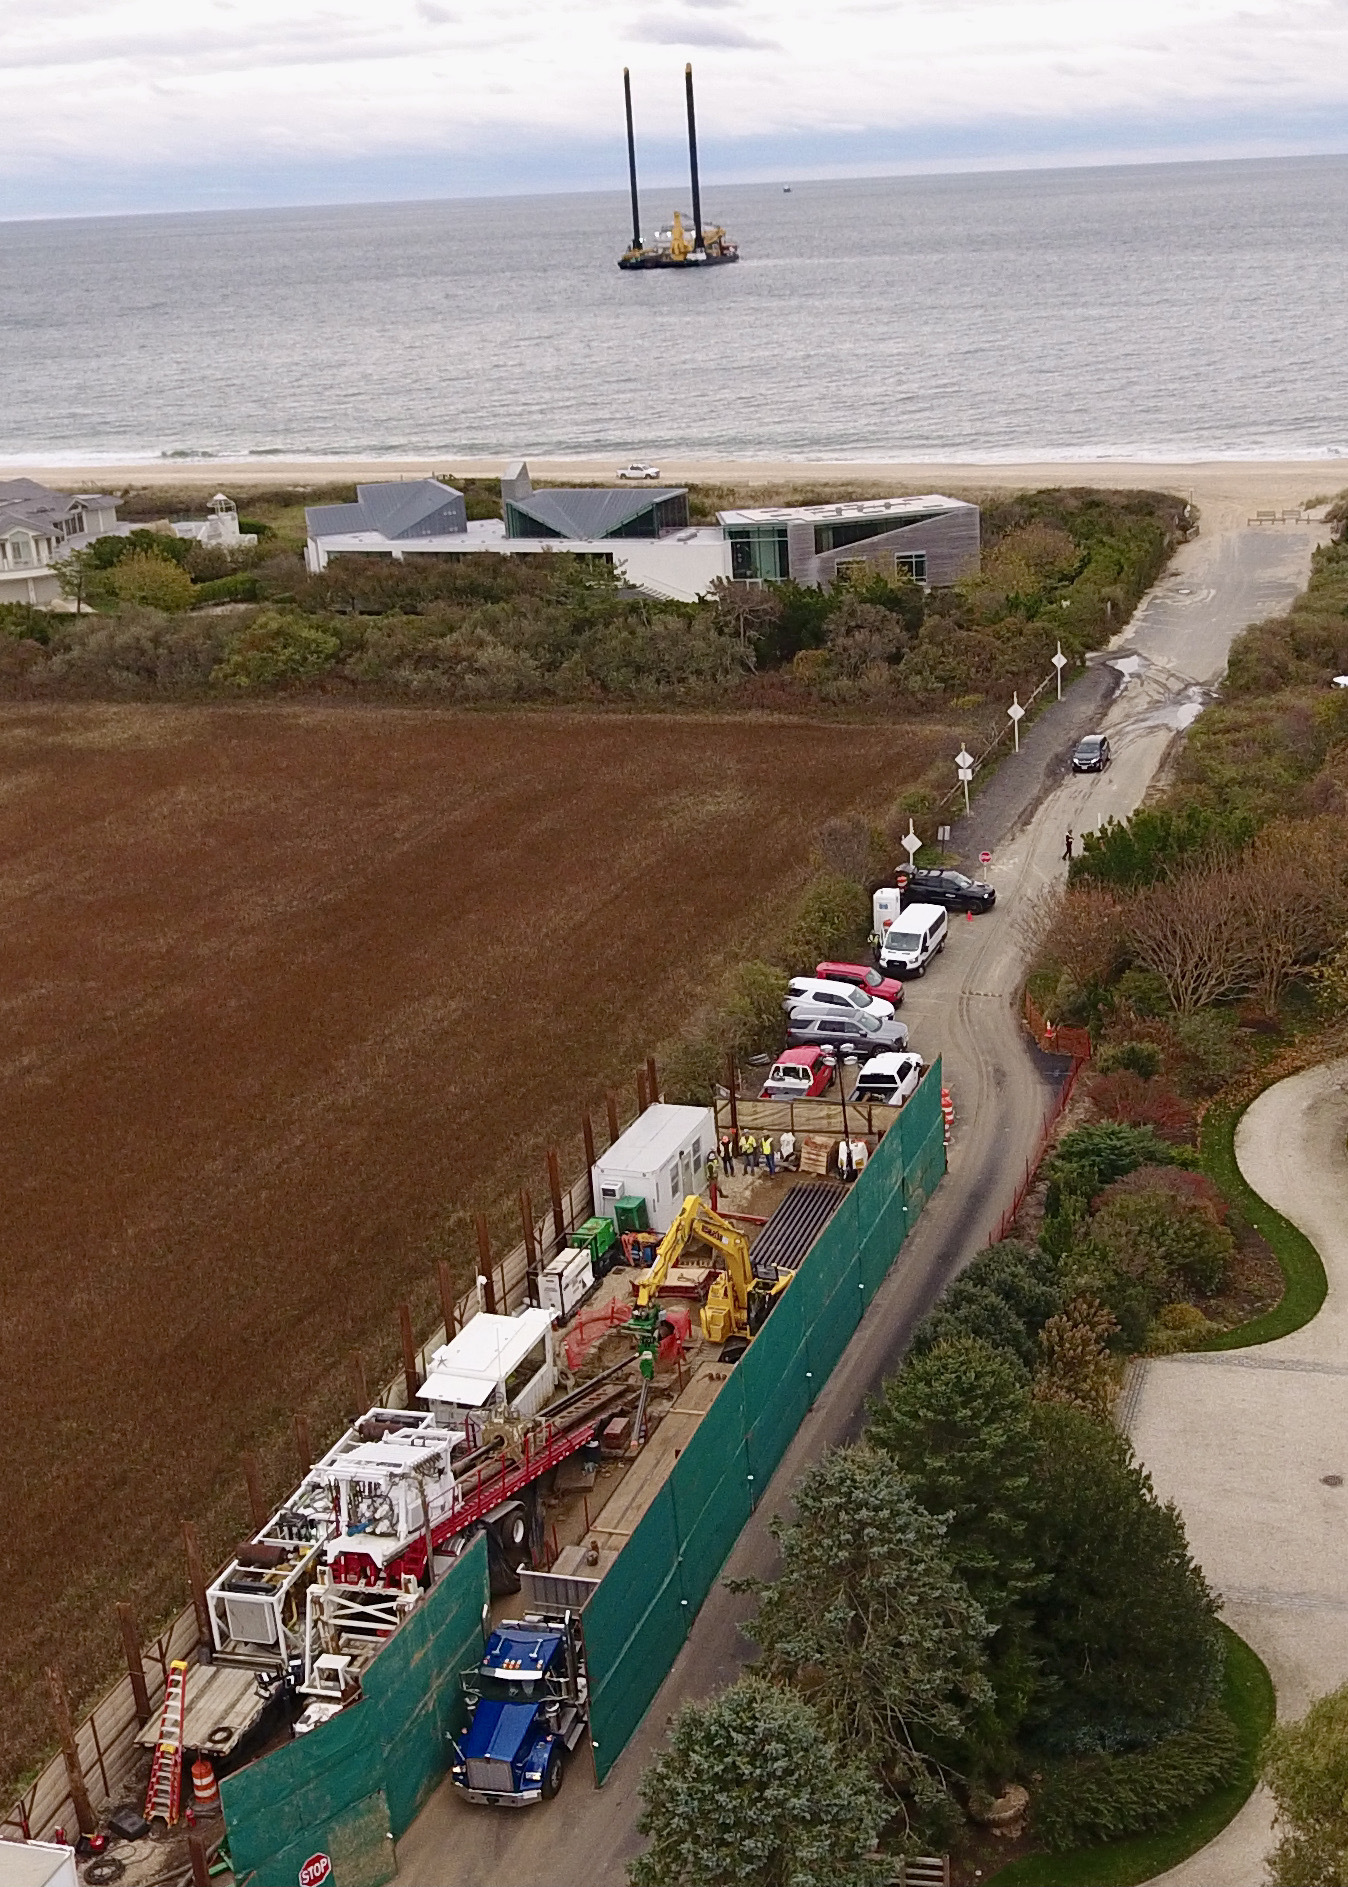 The horizontal directional drill will bore a conduit from the Beach Lane roadway, angling down 80 feet, running beneath the ocean beach and sea floor to a connection point more than 1,500 feet from shore where it will meet the cable boring running from the wind farm 50 miles to the east.